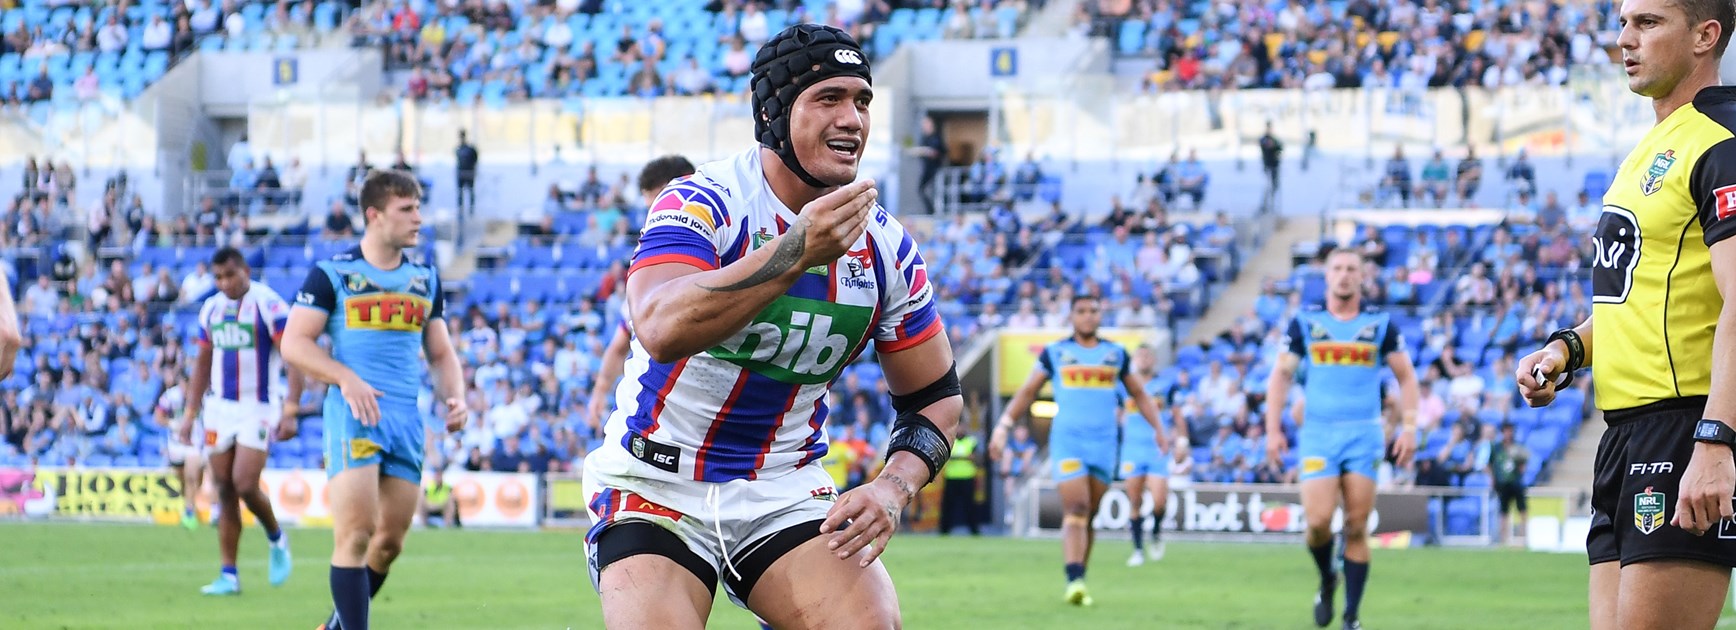 Smiling Sione zeroes in on century